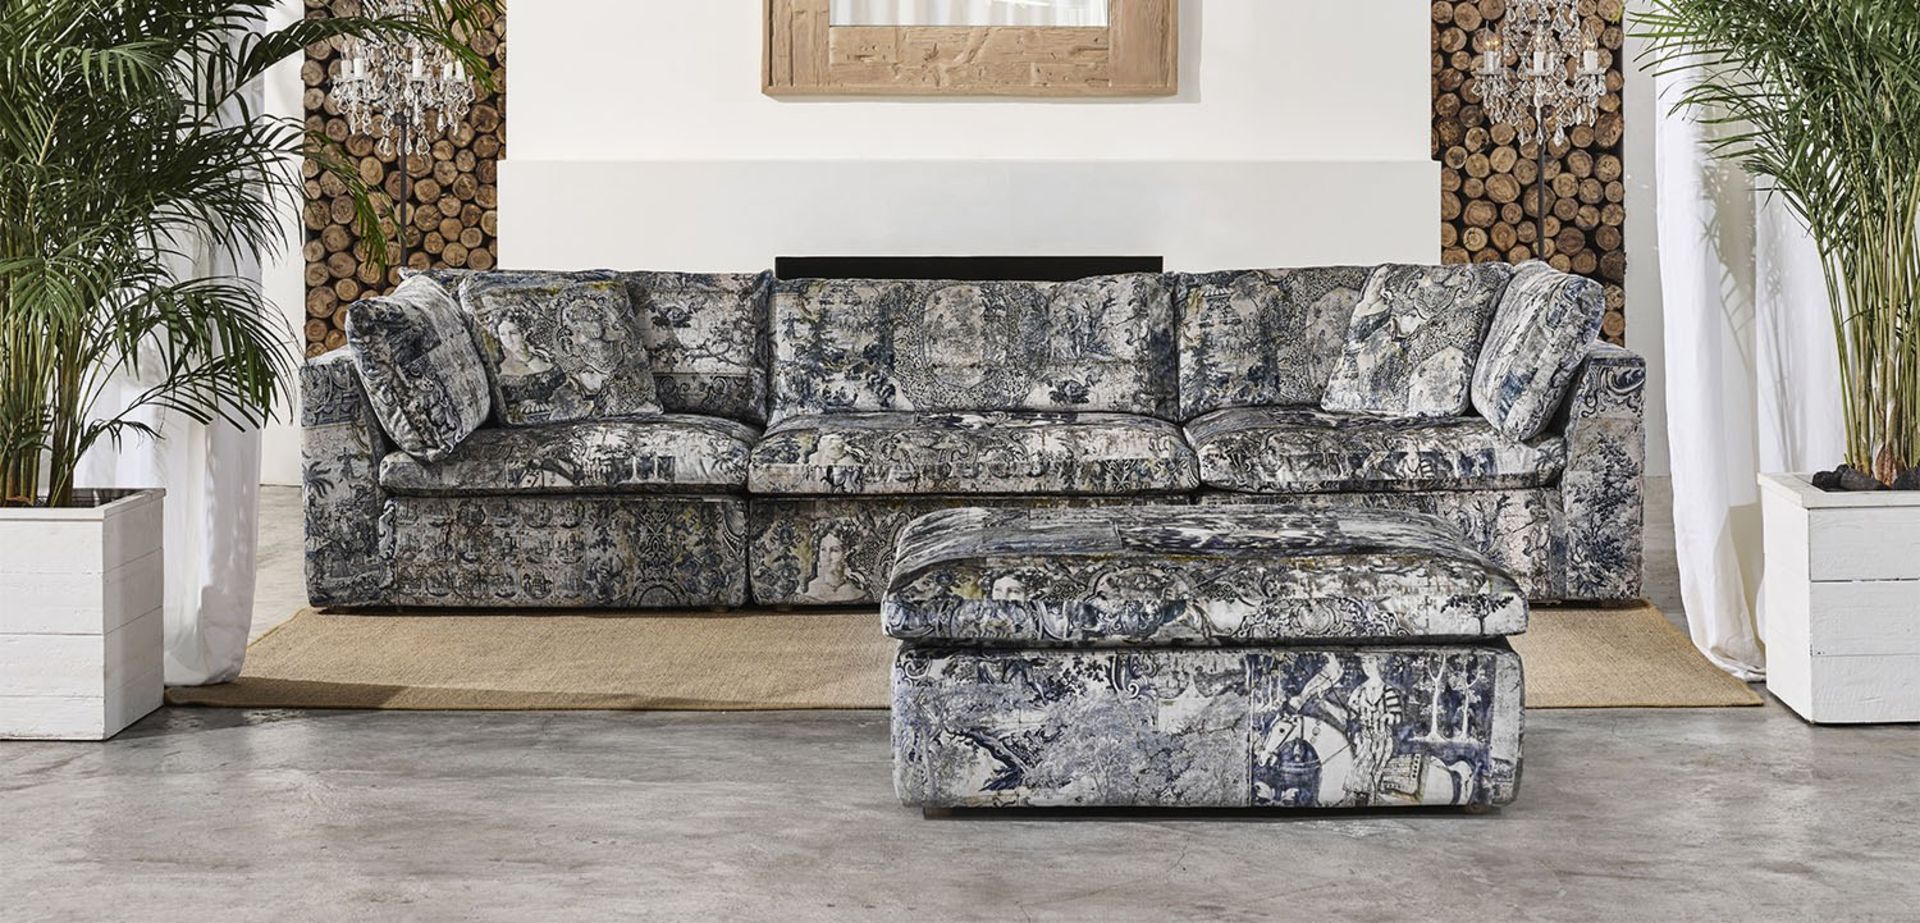 Bloom Sectional Sofa Luxury Velvet Finished In Vivid Velvet Emperors Clothes - The Bloom Is A